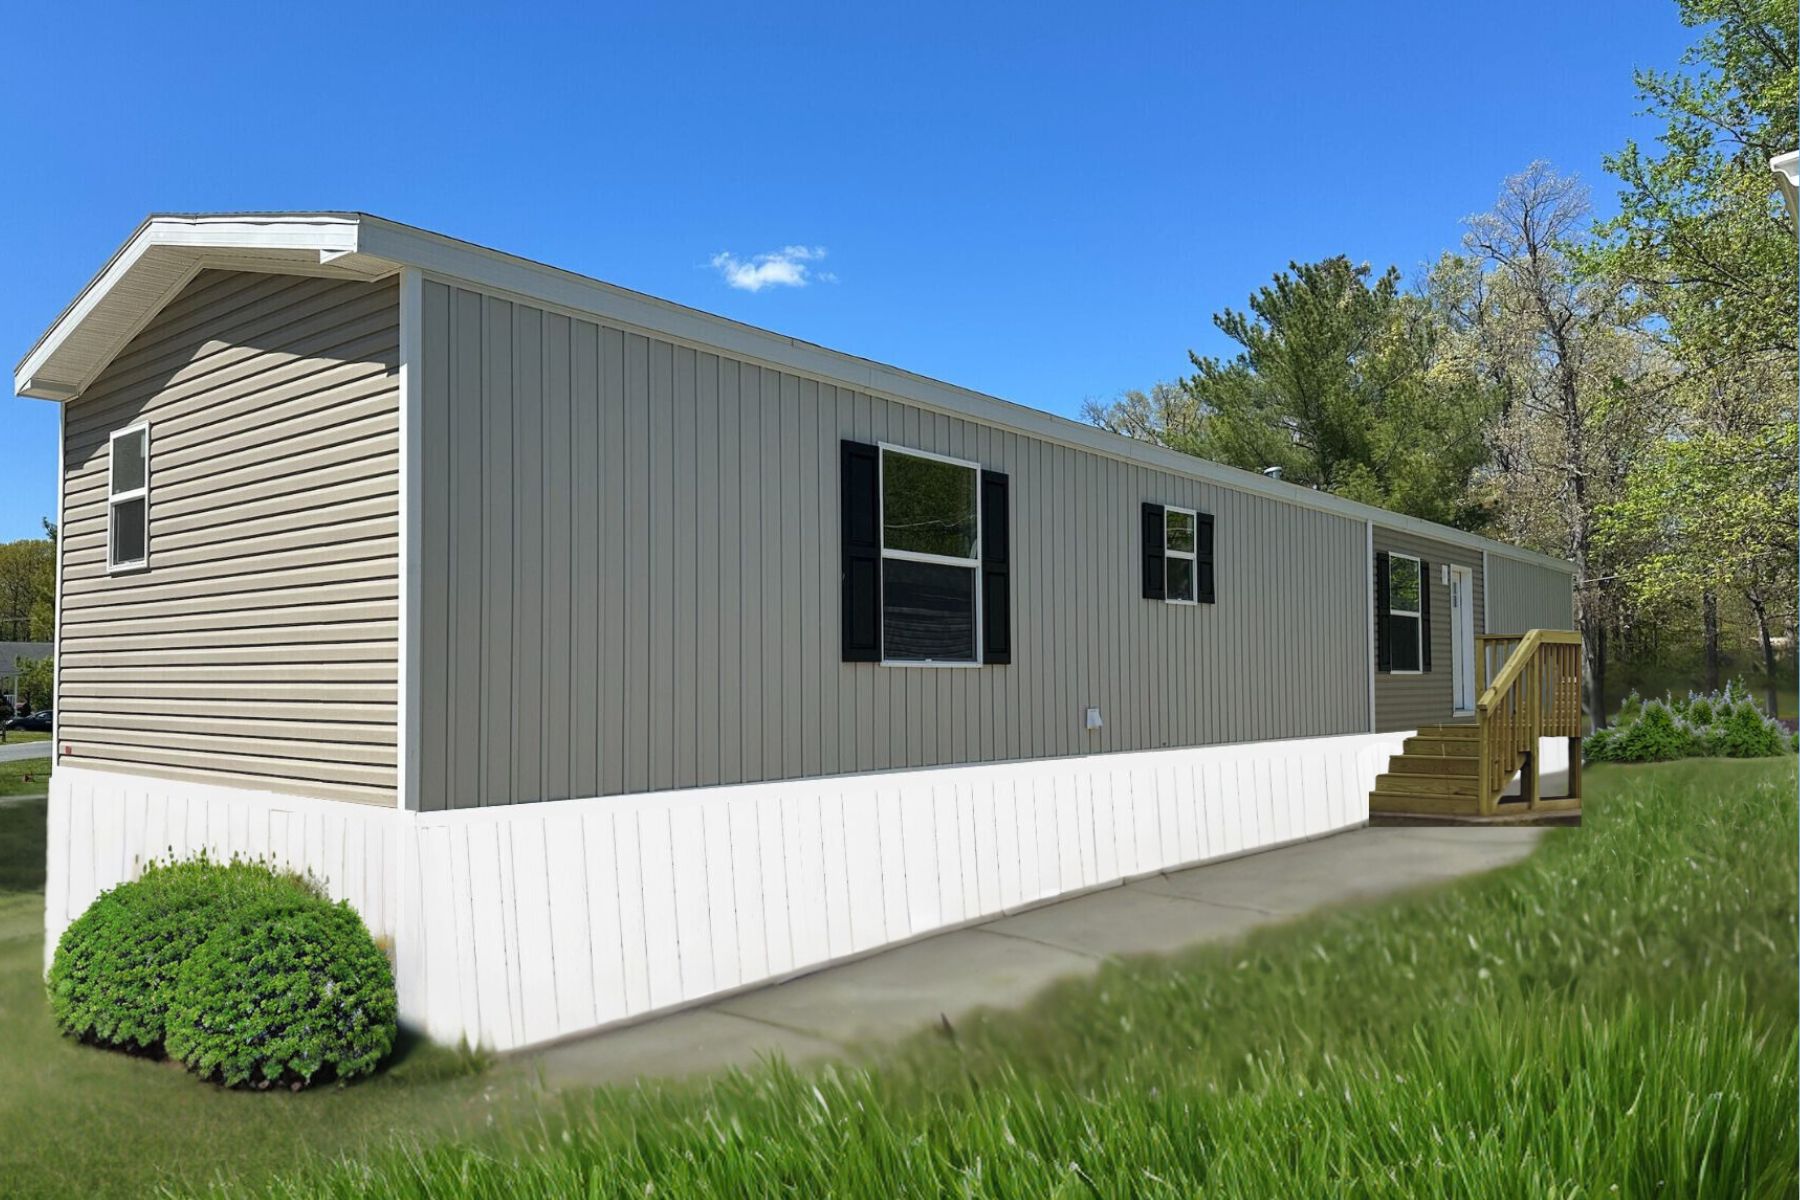 Willoughby Estates Lot 7 Exterior - Mobile Home for Sale